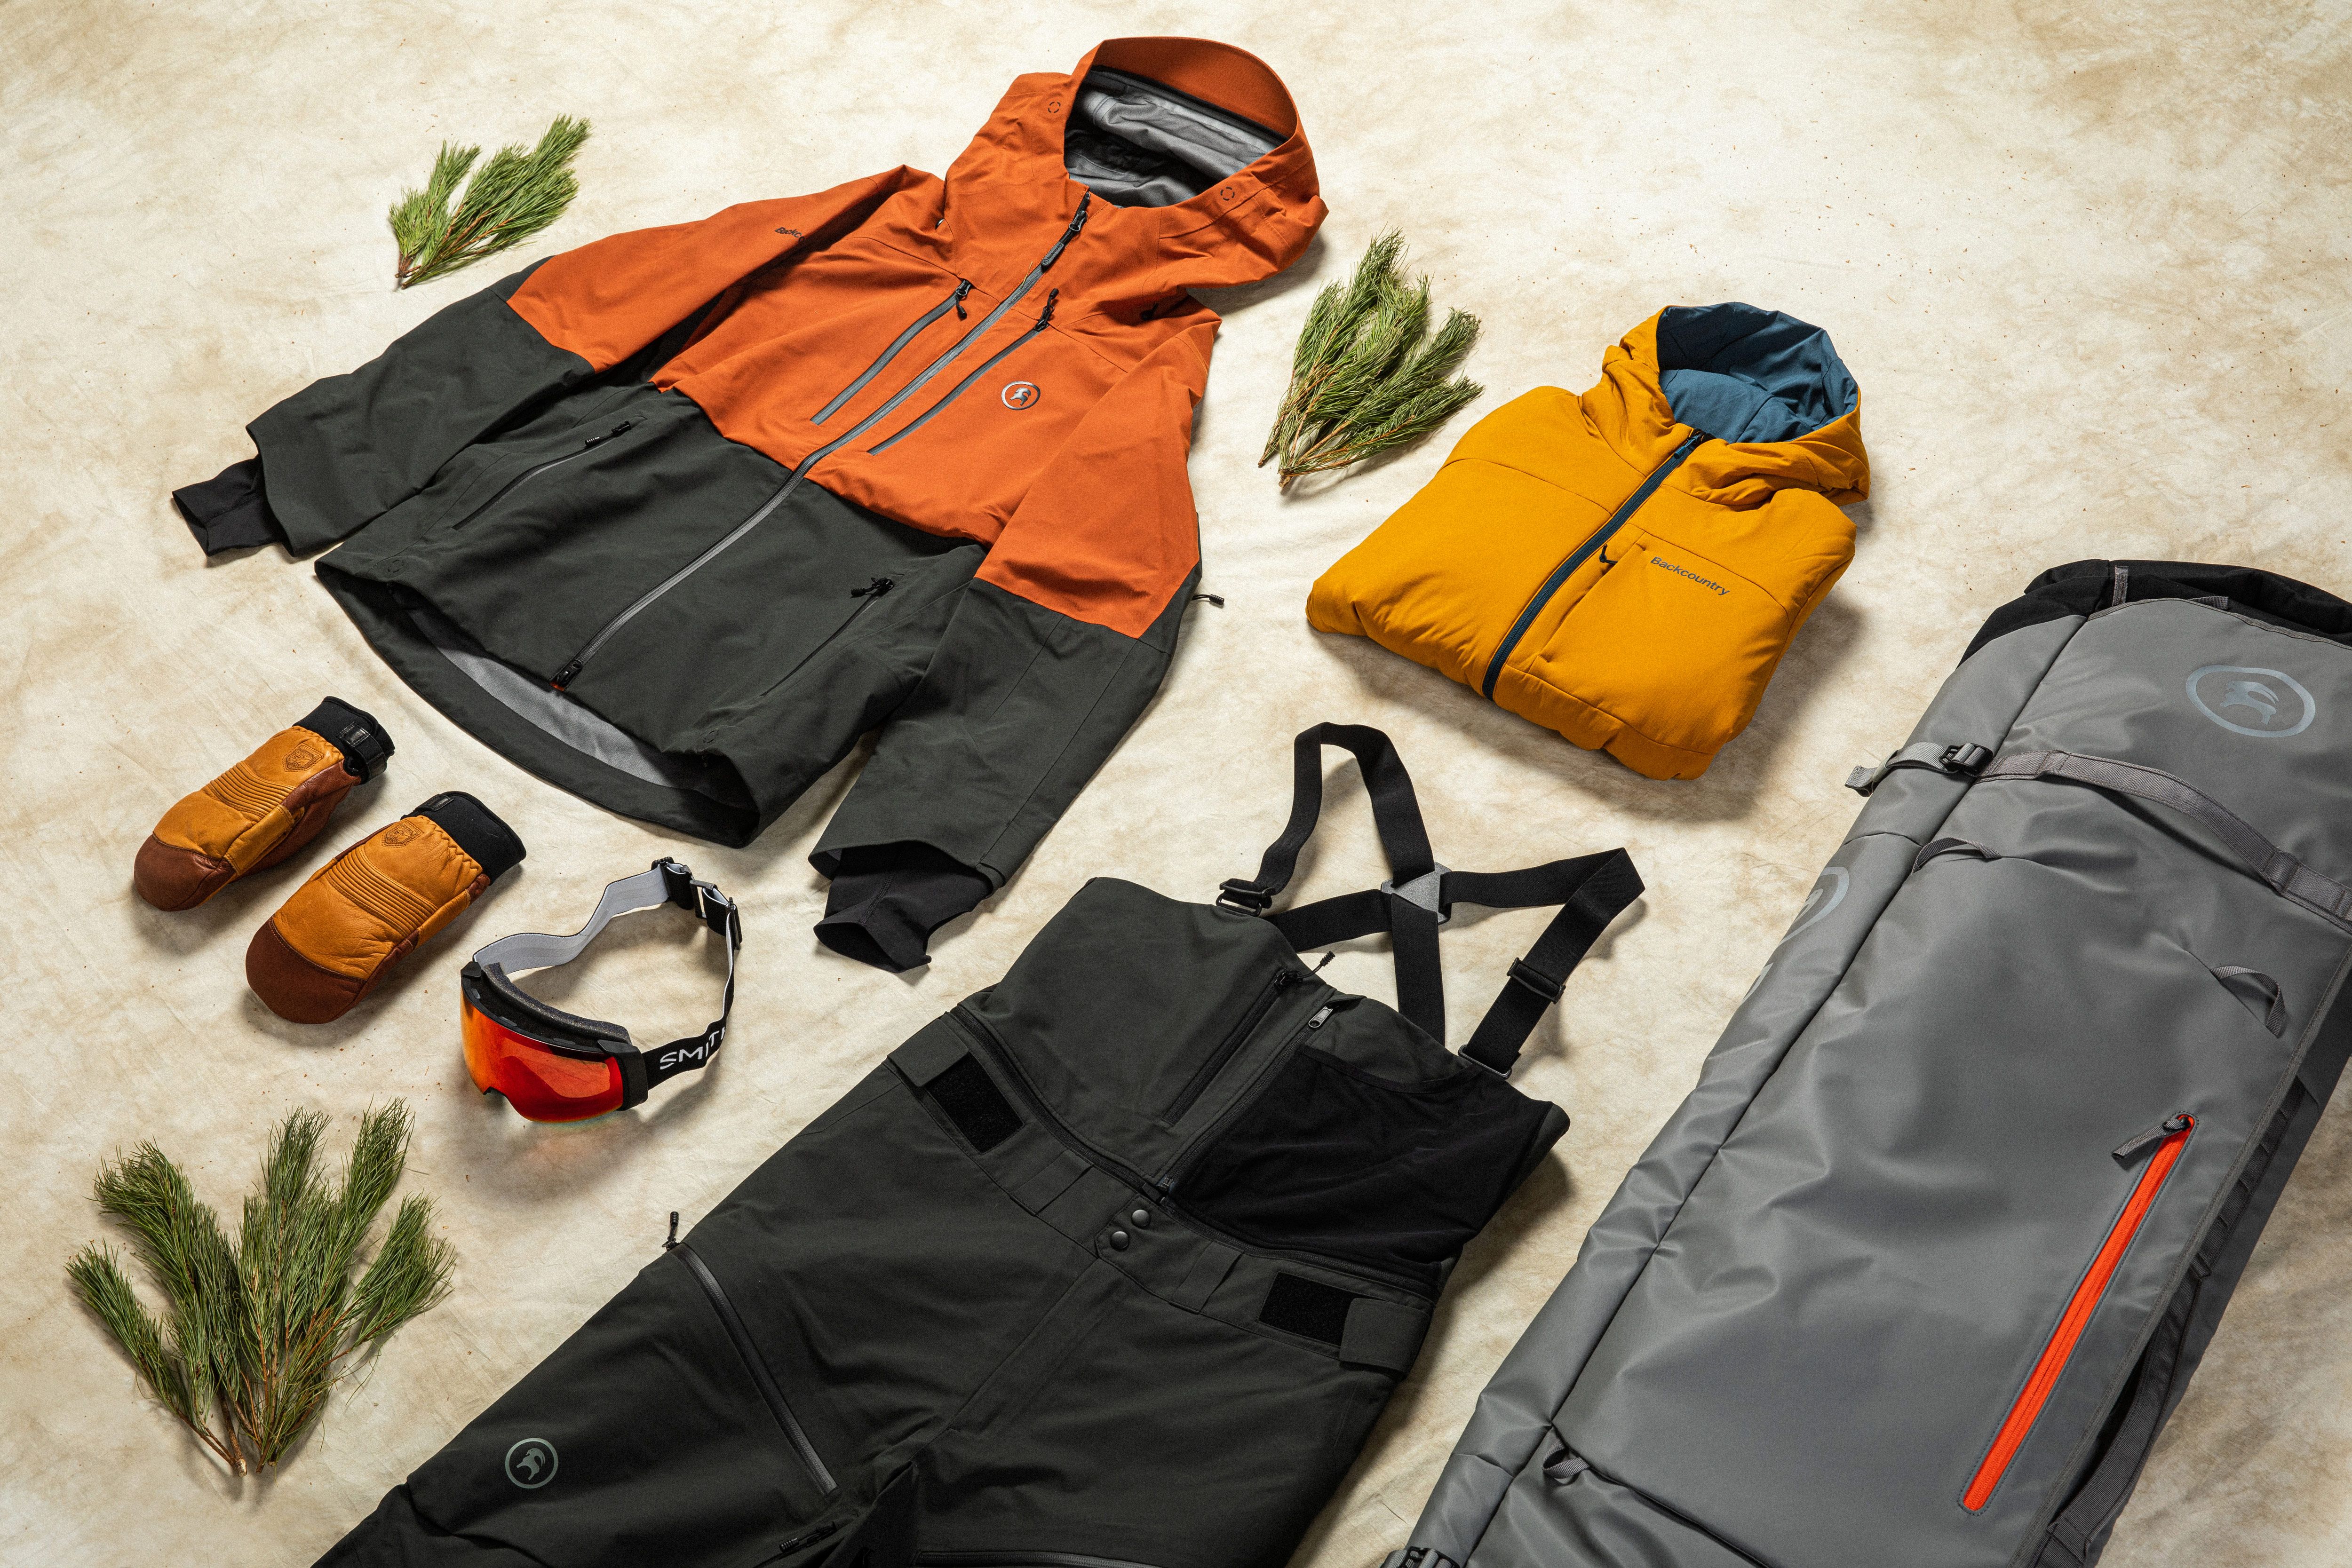 This Is The Perfect Setup For Shredding The Backcountry This Winter